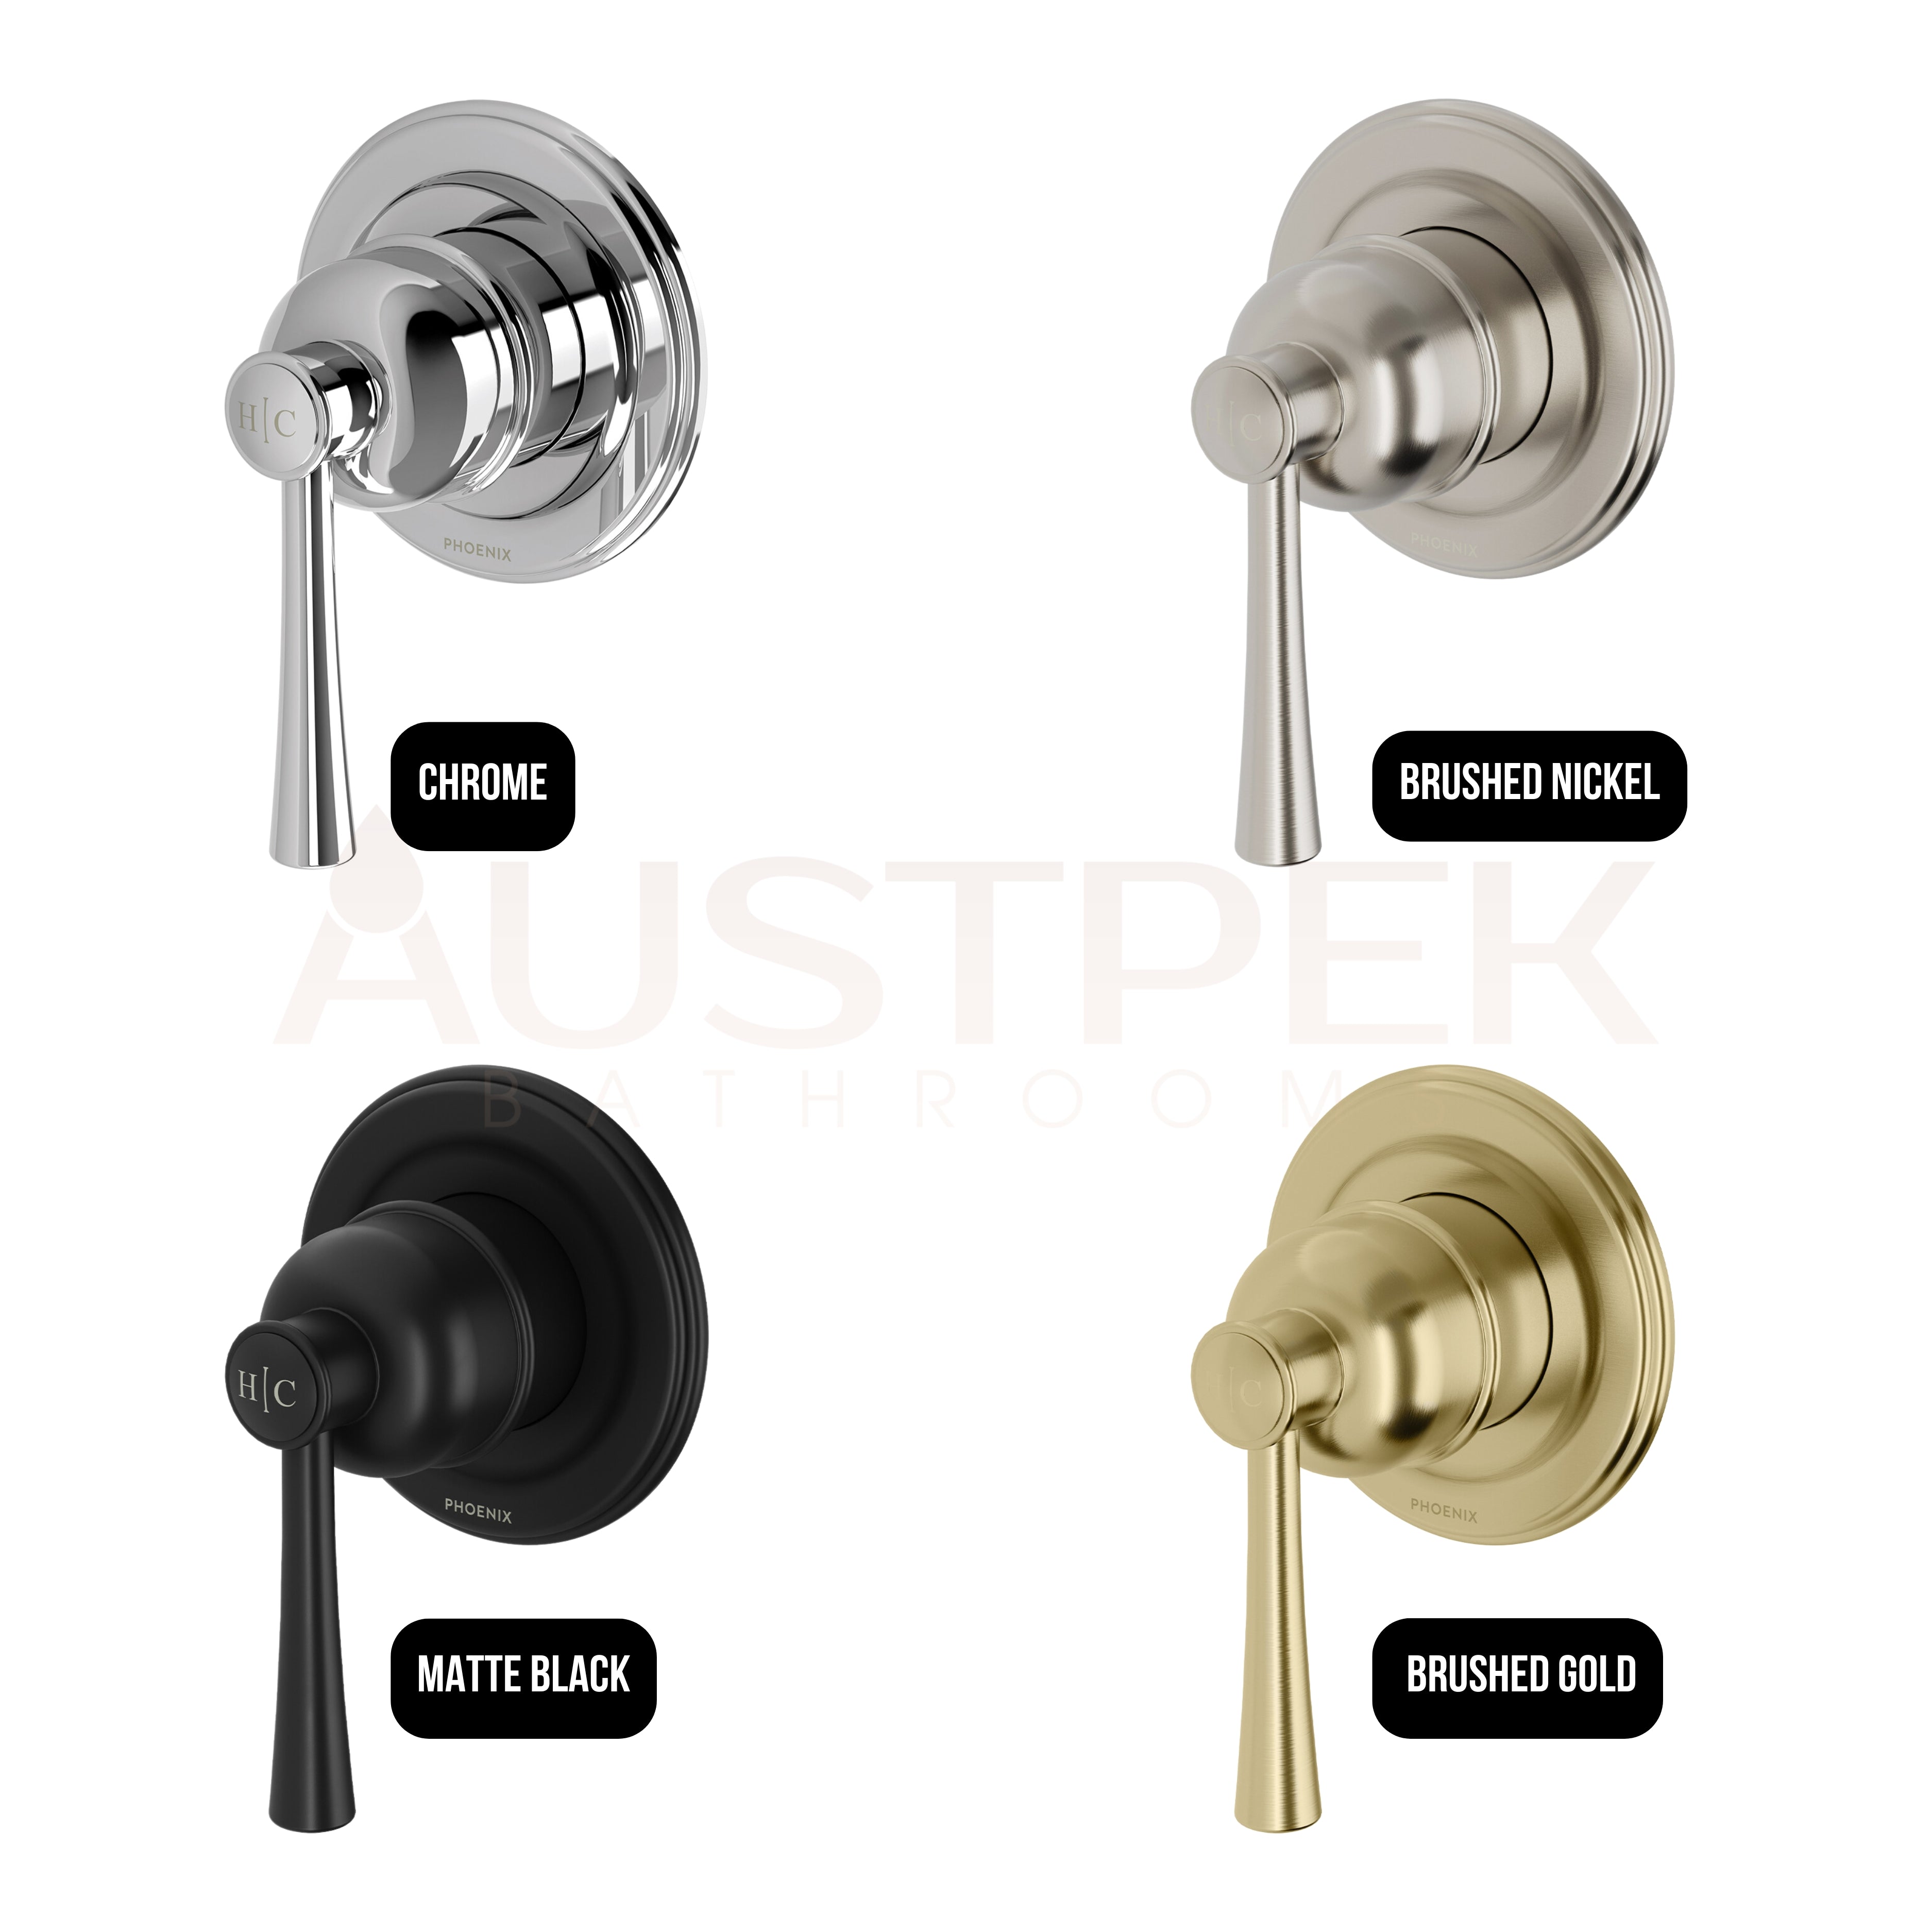 PHOENIX CROMFORD SWITCHMIX SHOWER / WALL MIXER FIT-OFF AND ROUGH-IN KIT BRUSHED GOLD